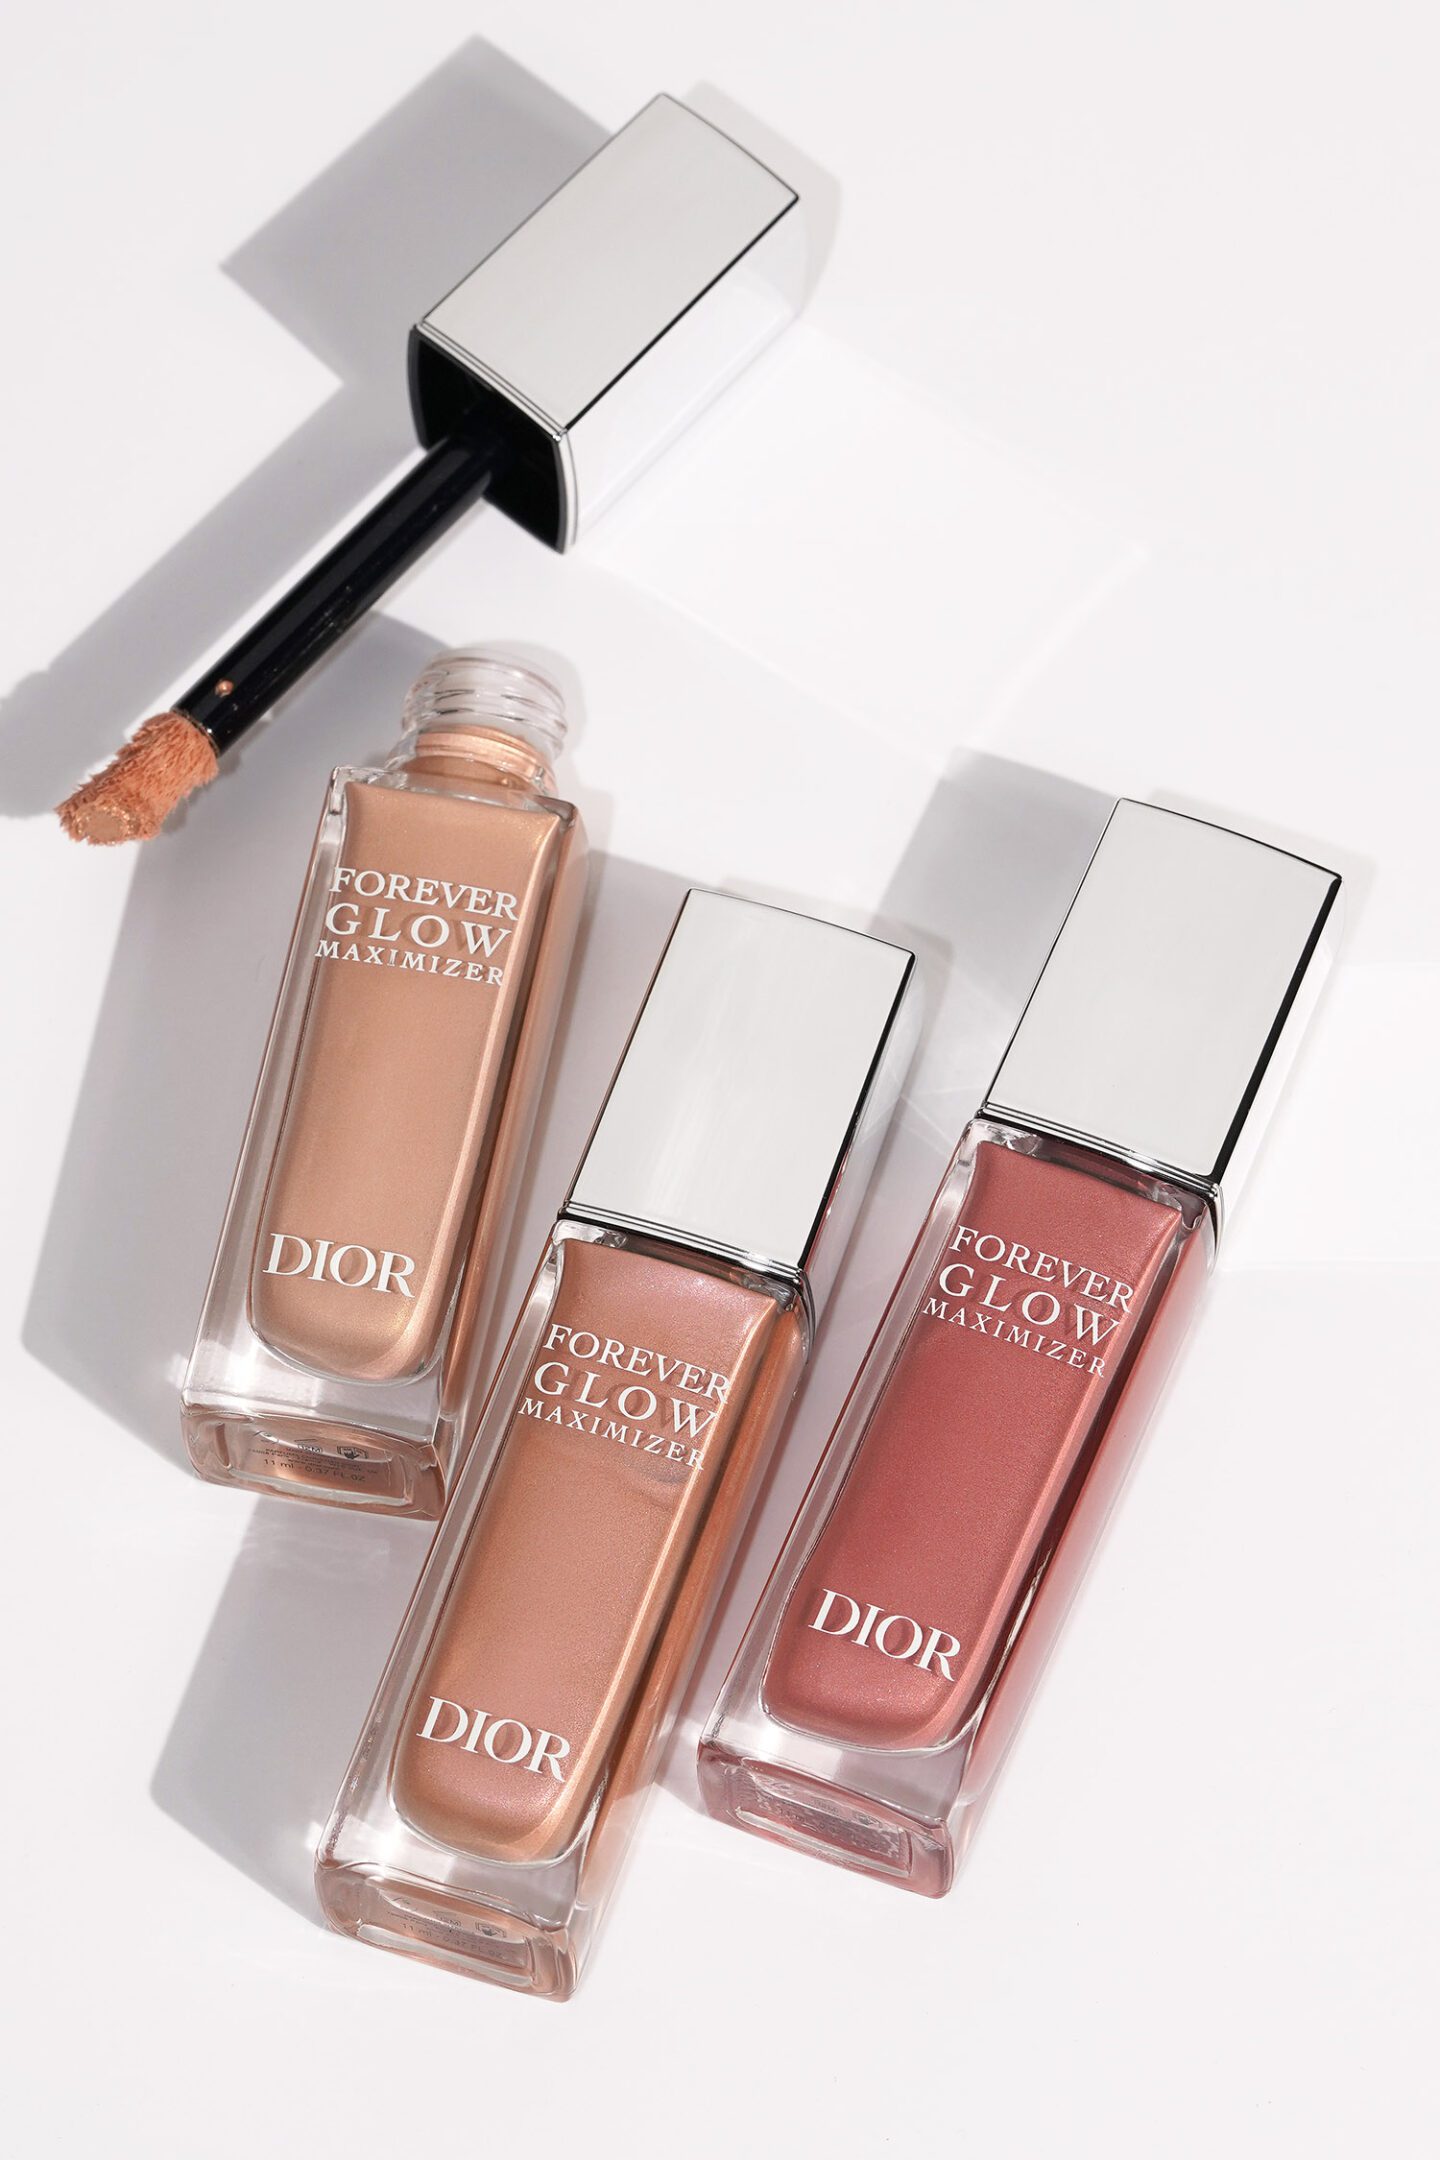 Dior Beauty Forever Glow Maximizer Gold, Peachy and Rosy